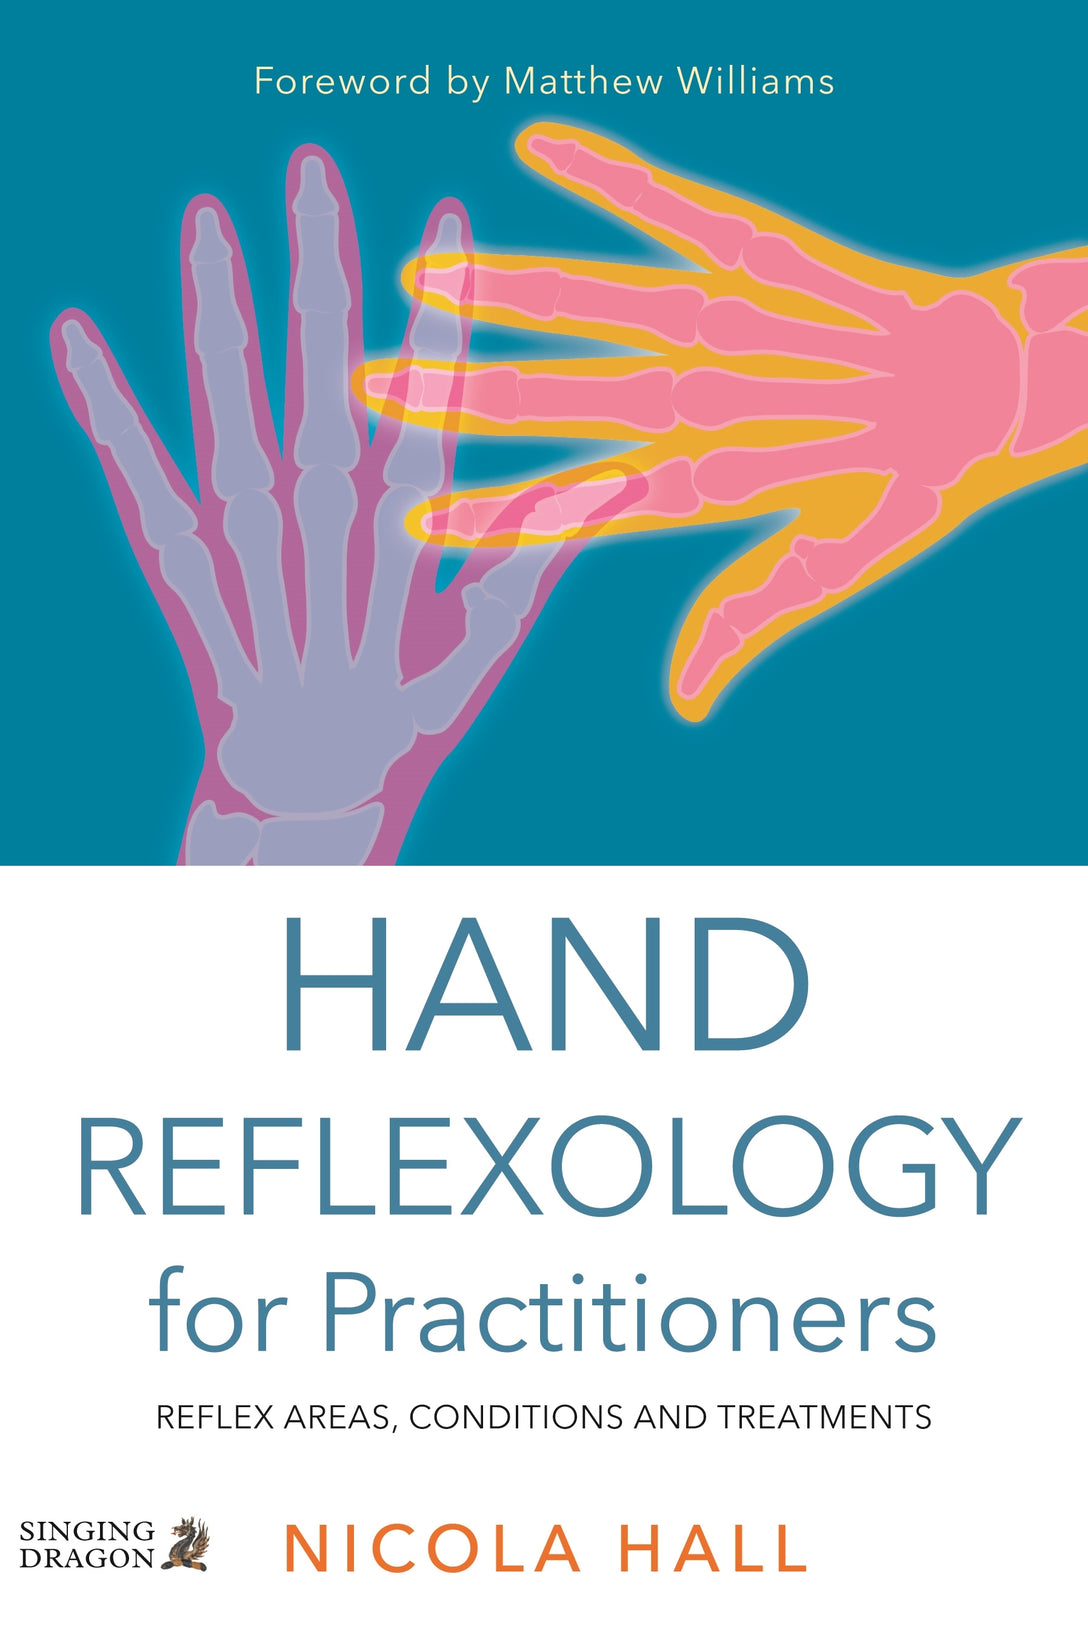 Hand Reflexology for Practitioners by Matthew Williams, Nicola Hall